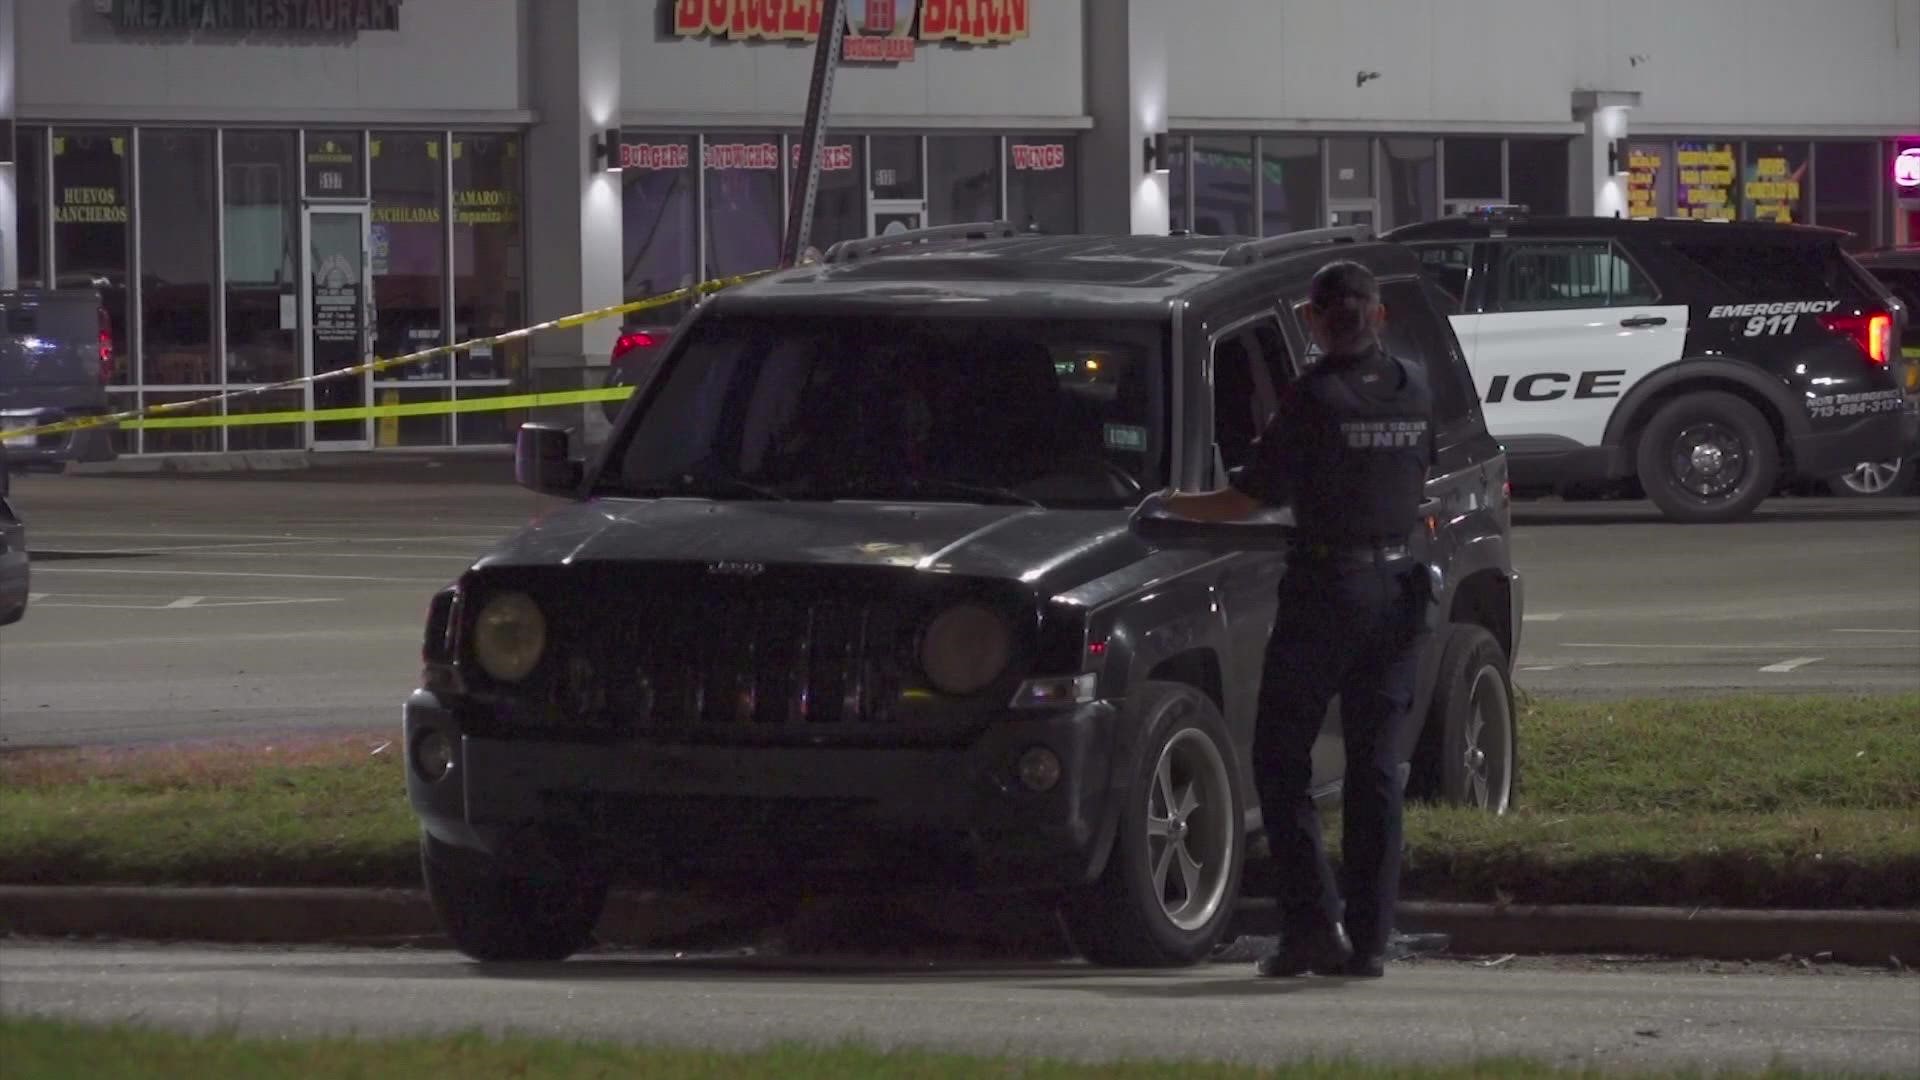 A man was found dead with a gunshot wound inside of a car in northwest Houston, according to police.